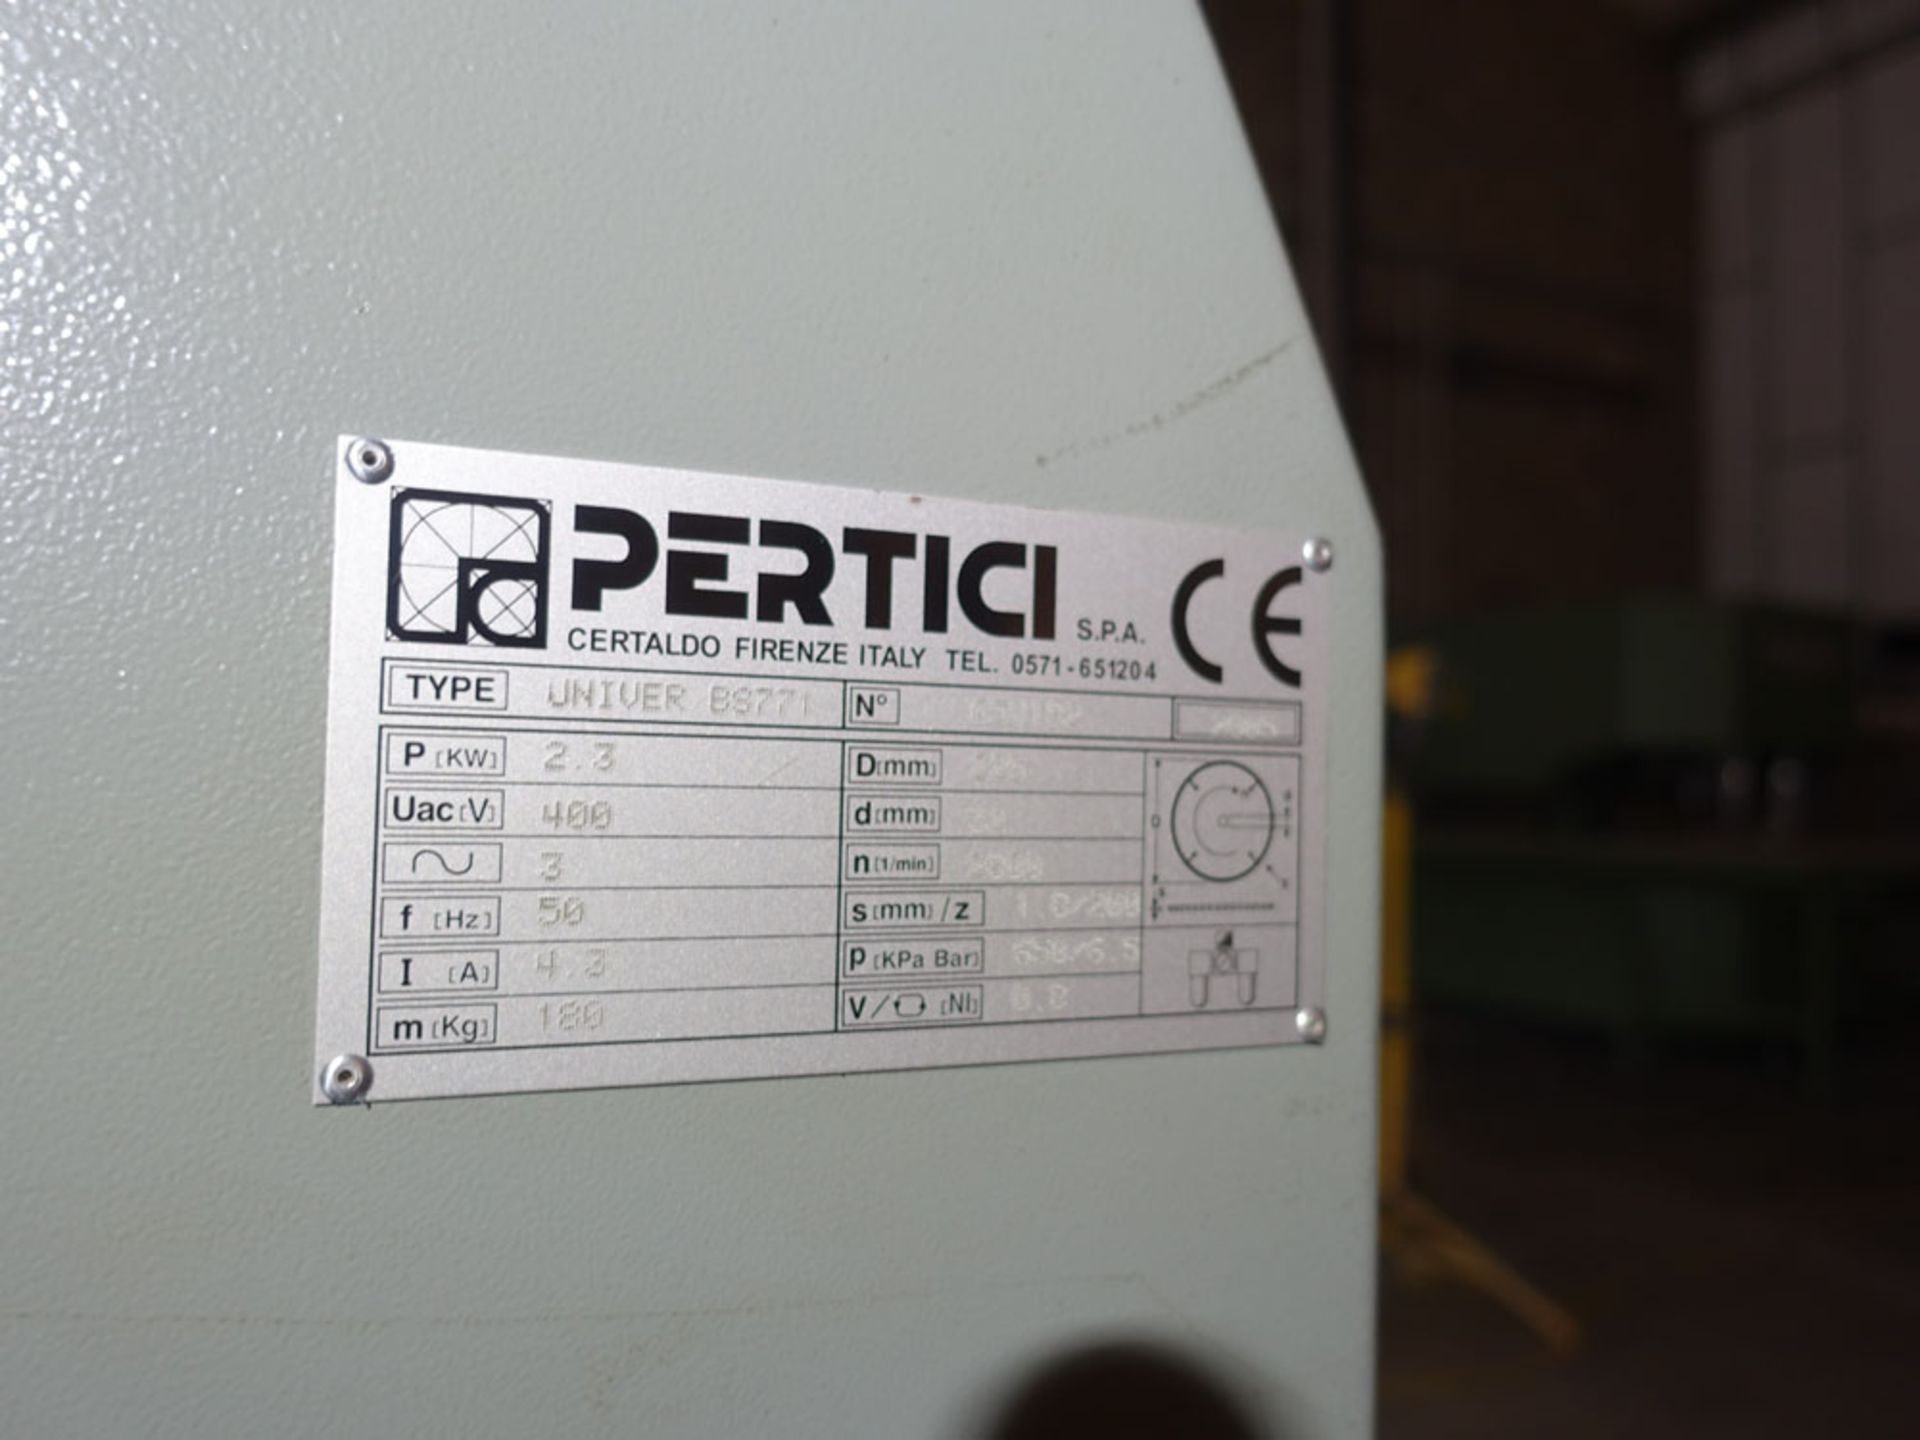 Pertici Univer BS771 bead saw Serial number 05V182 Year 2005 - Image 8 of 9